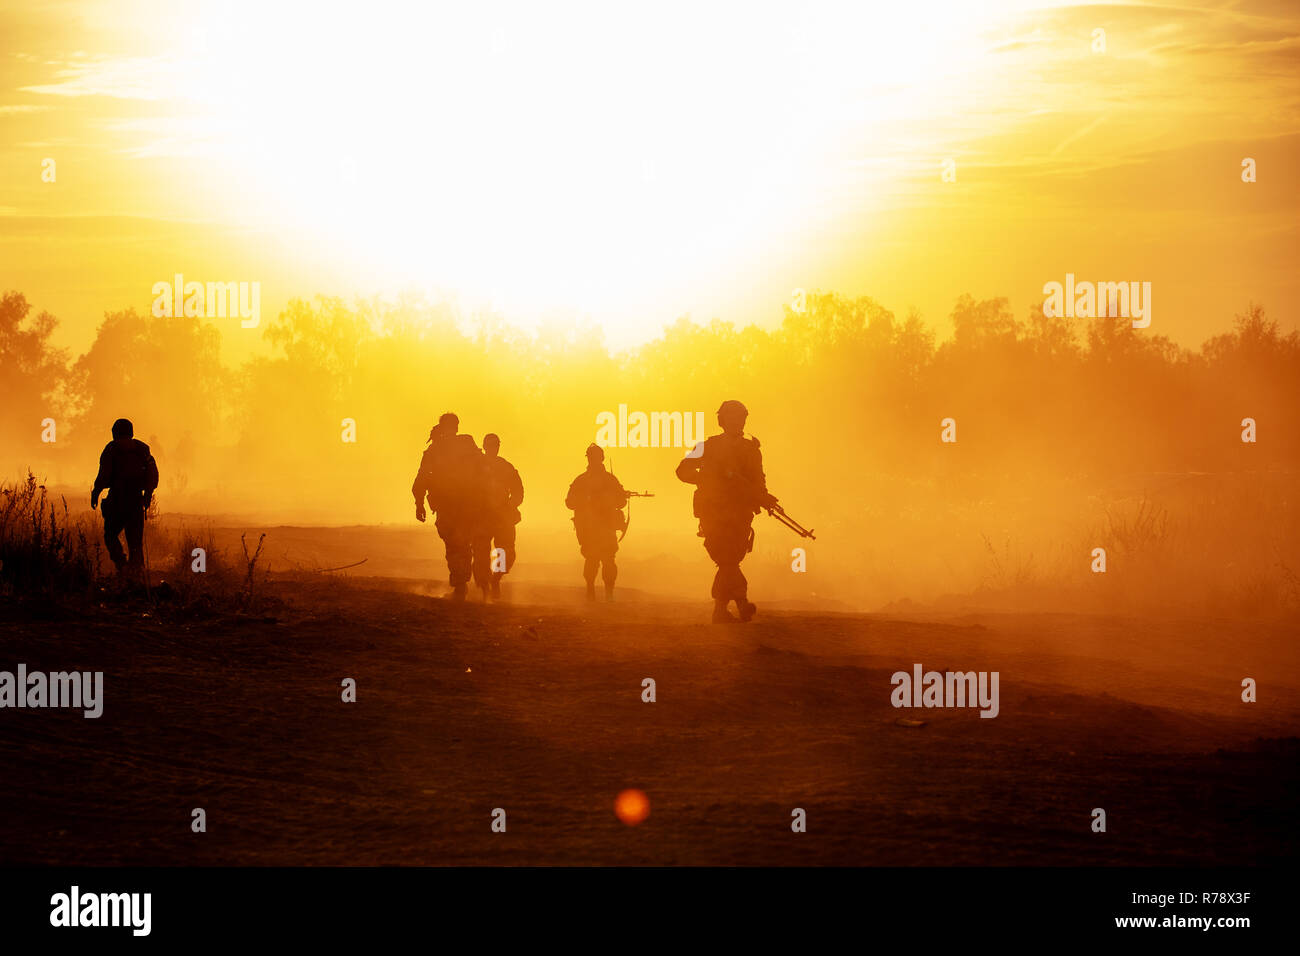 silhouette action soldiers walking hold weapons the background is smoke and sunset and white balance ship effect dark art style Stock Photo